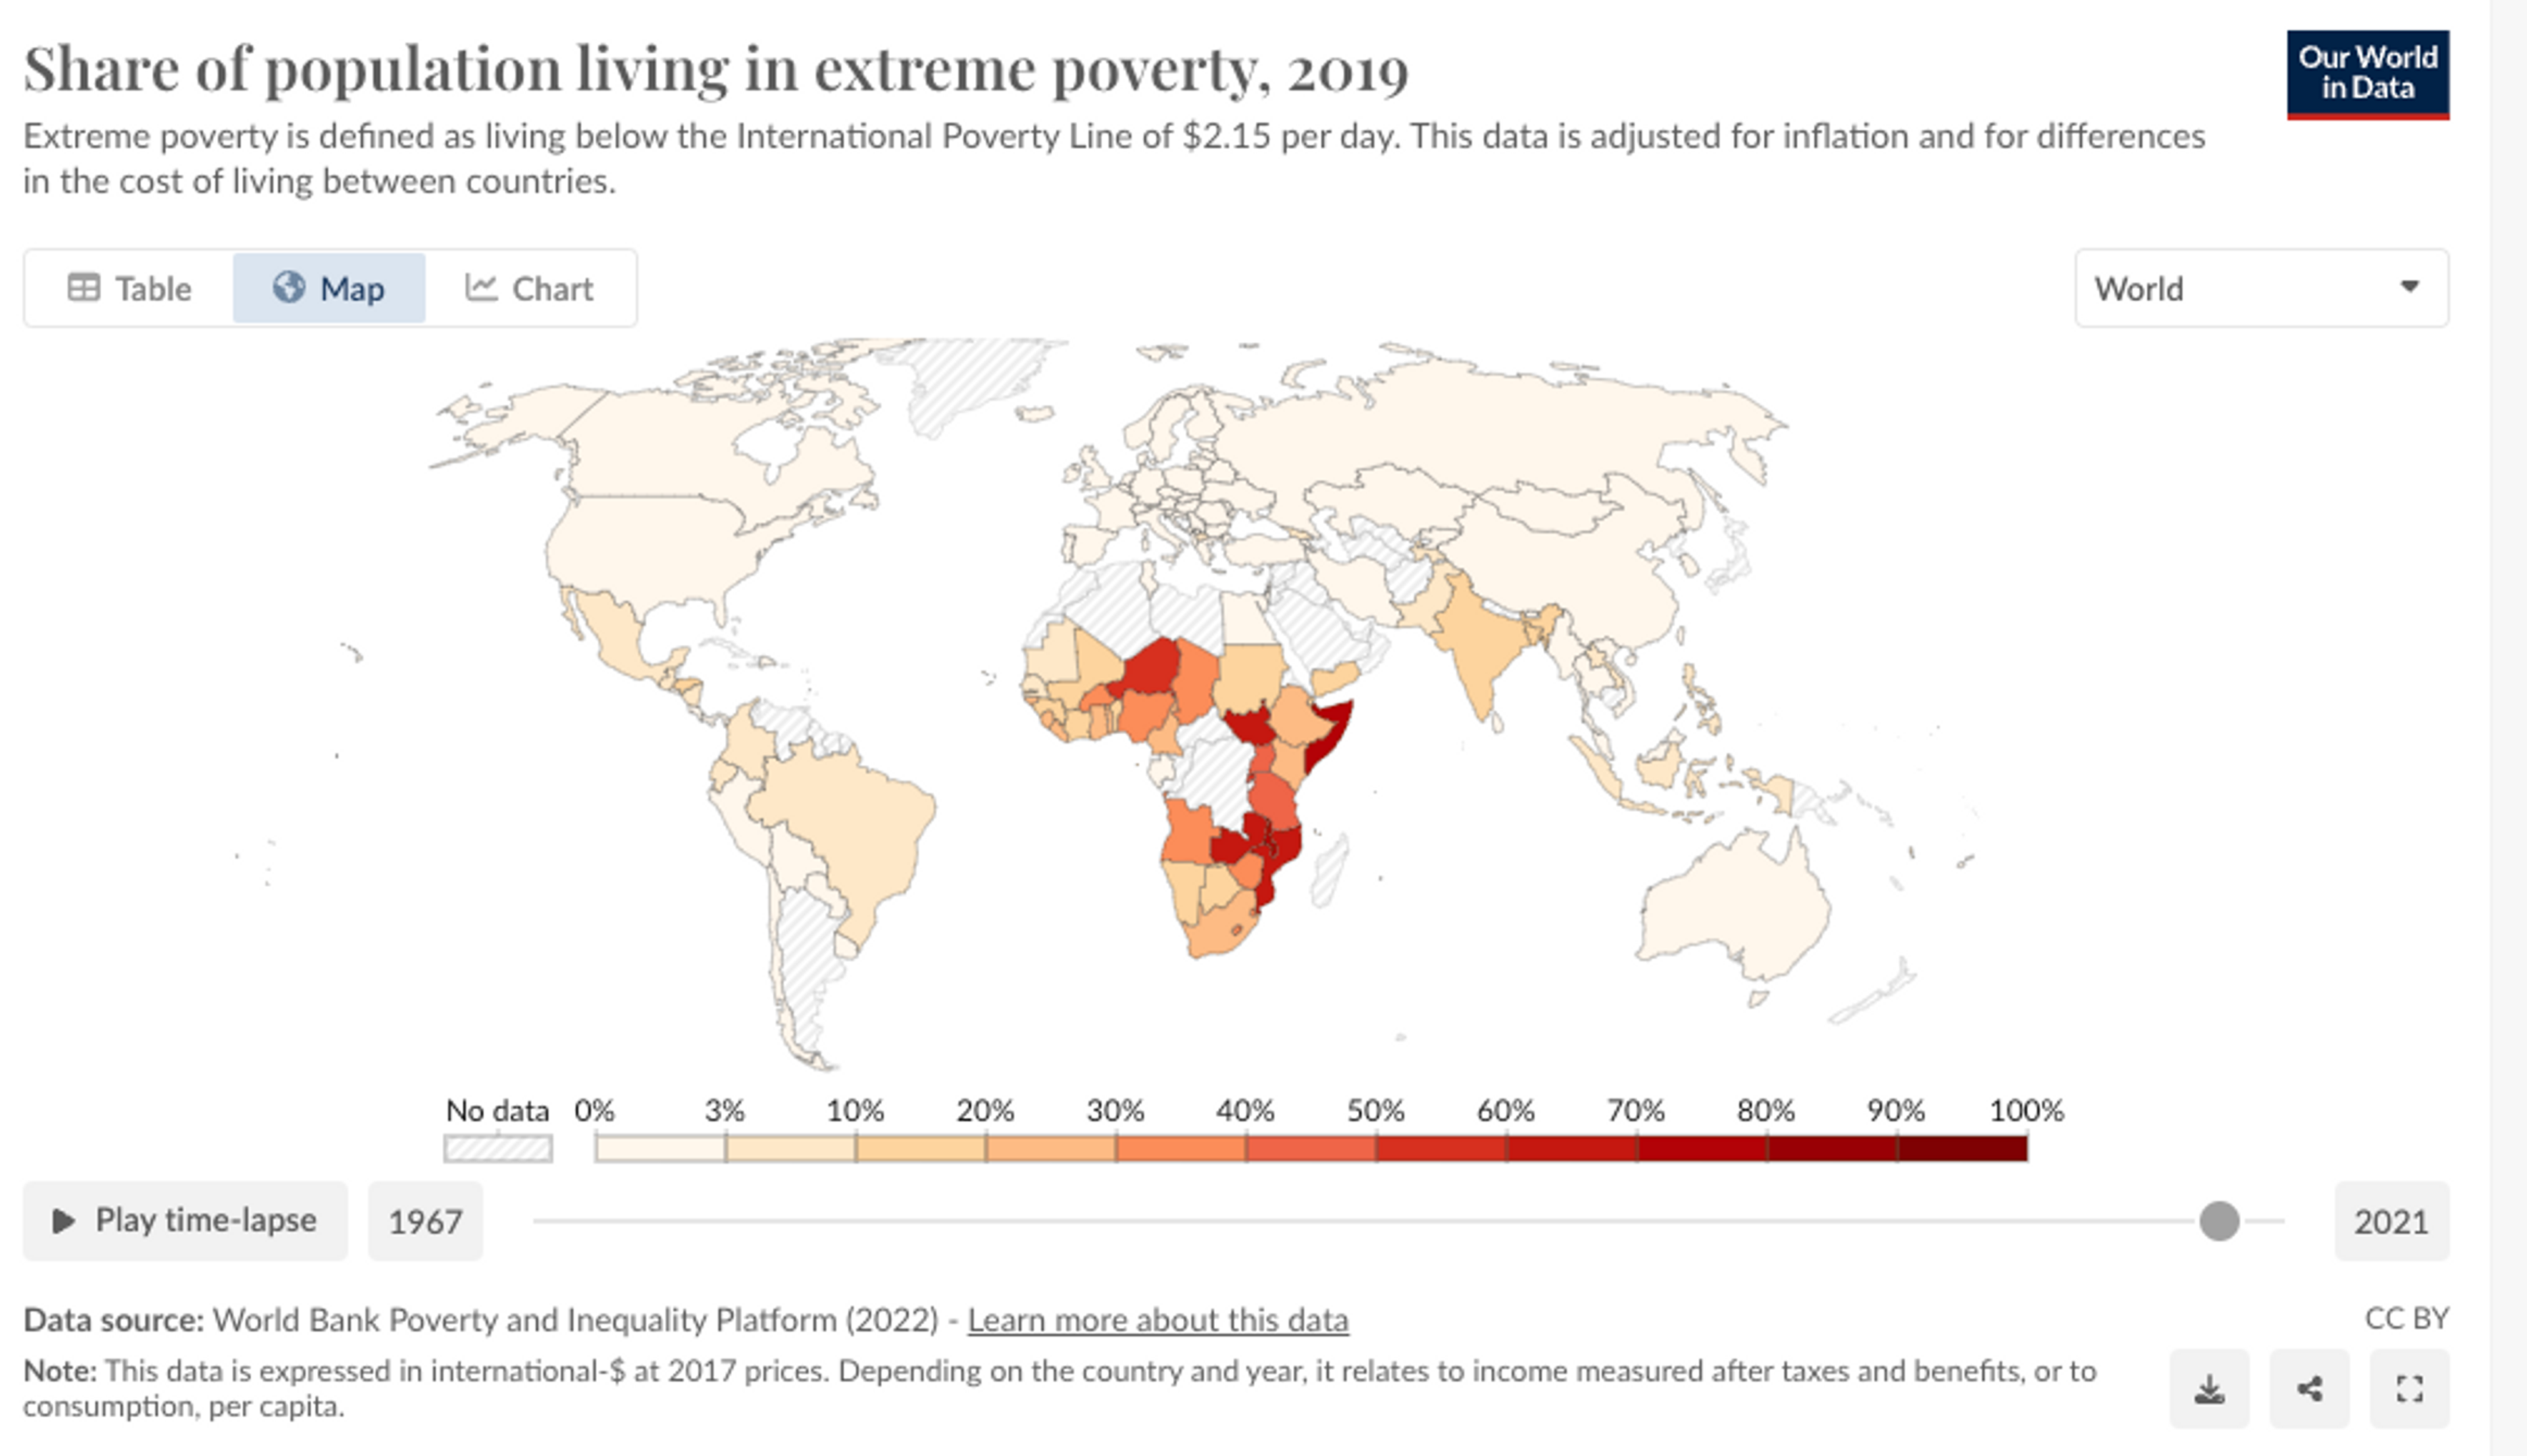 Share of population living in extreme poverty, from Our World in Data